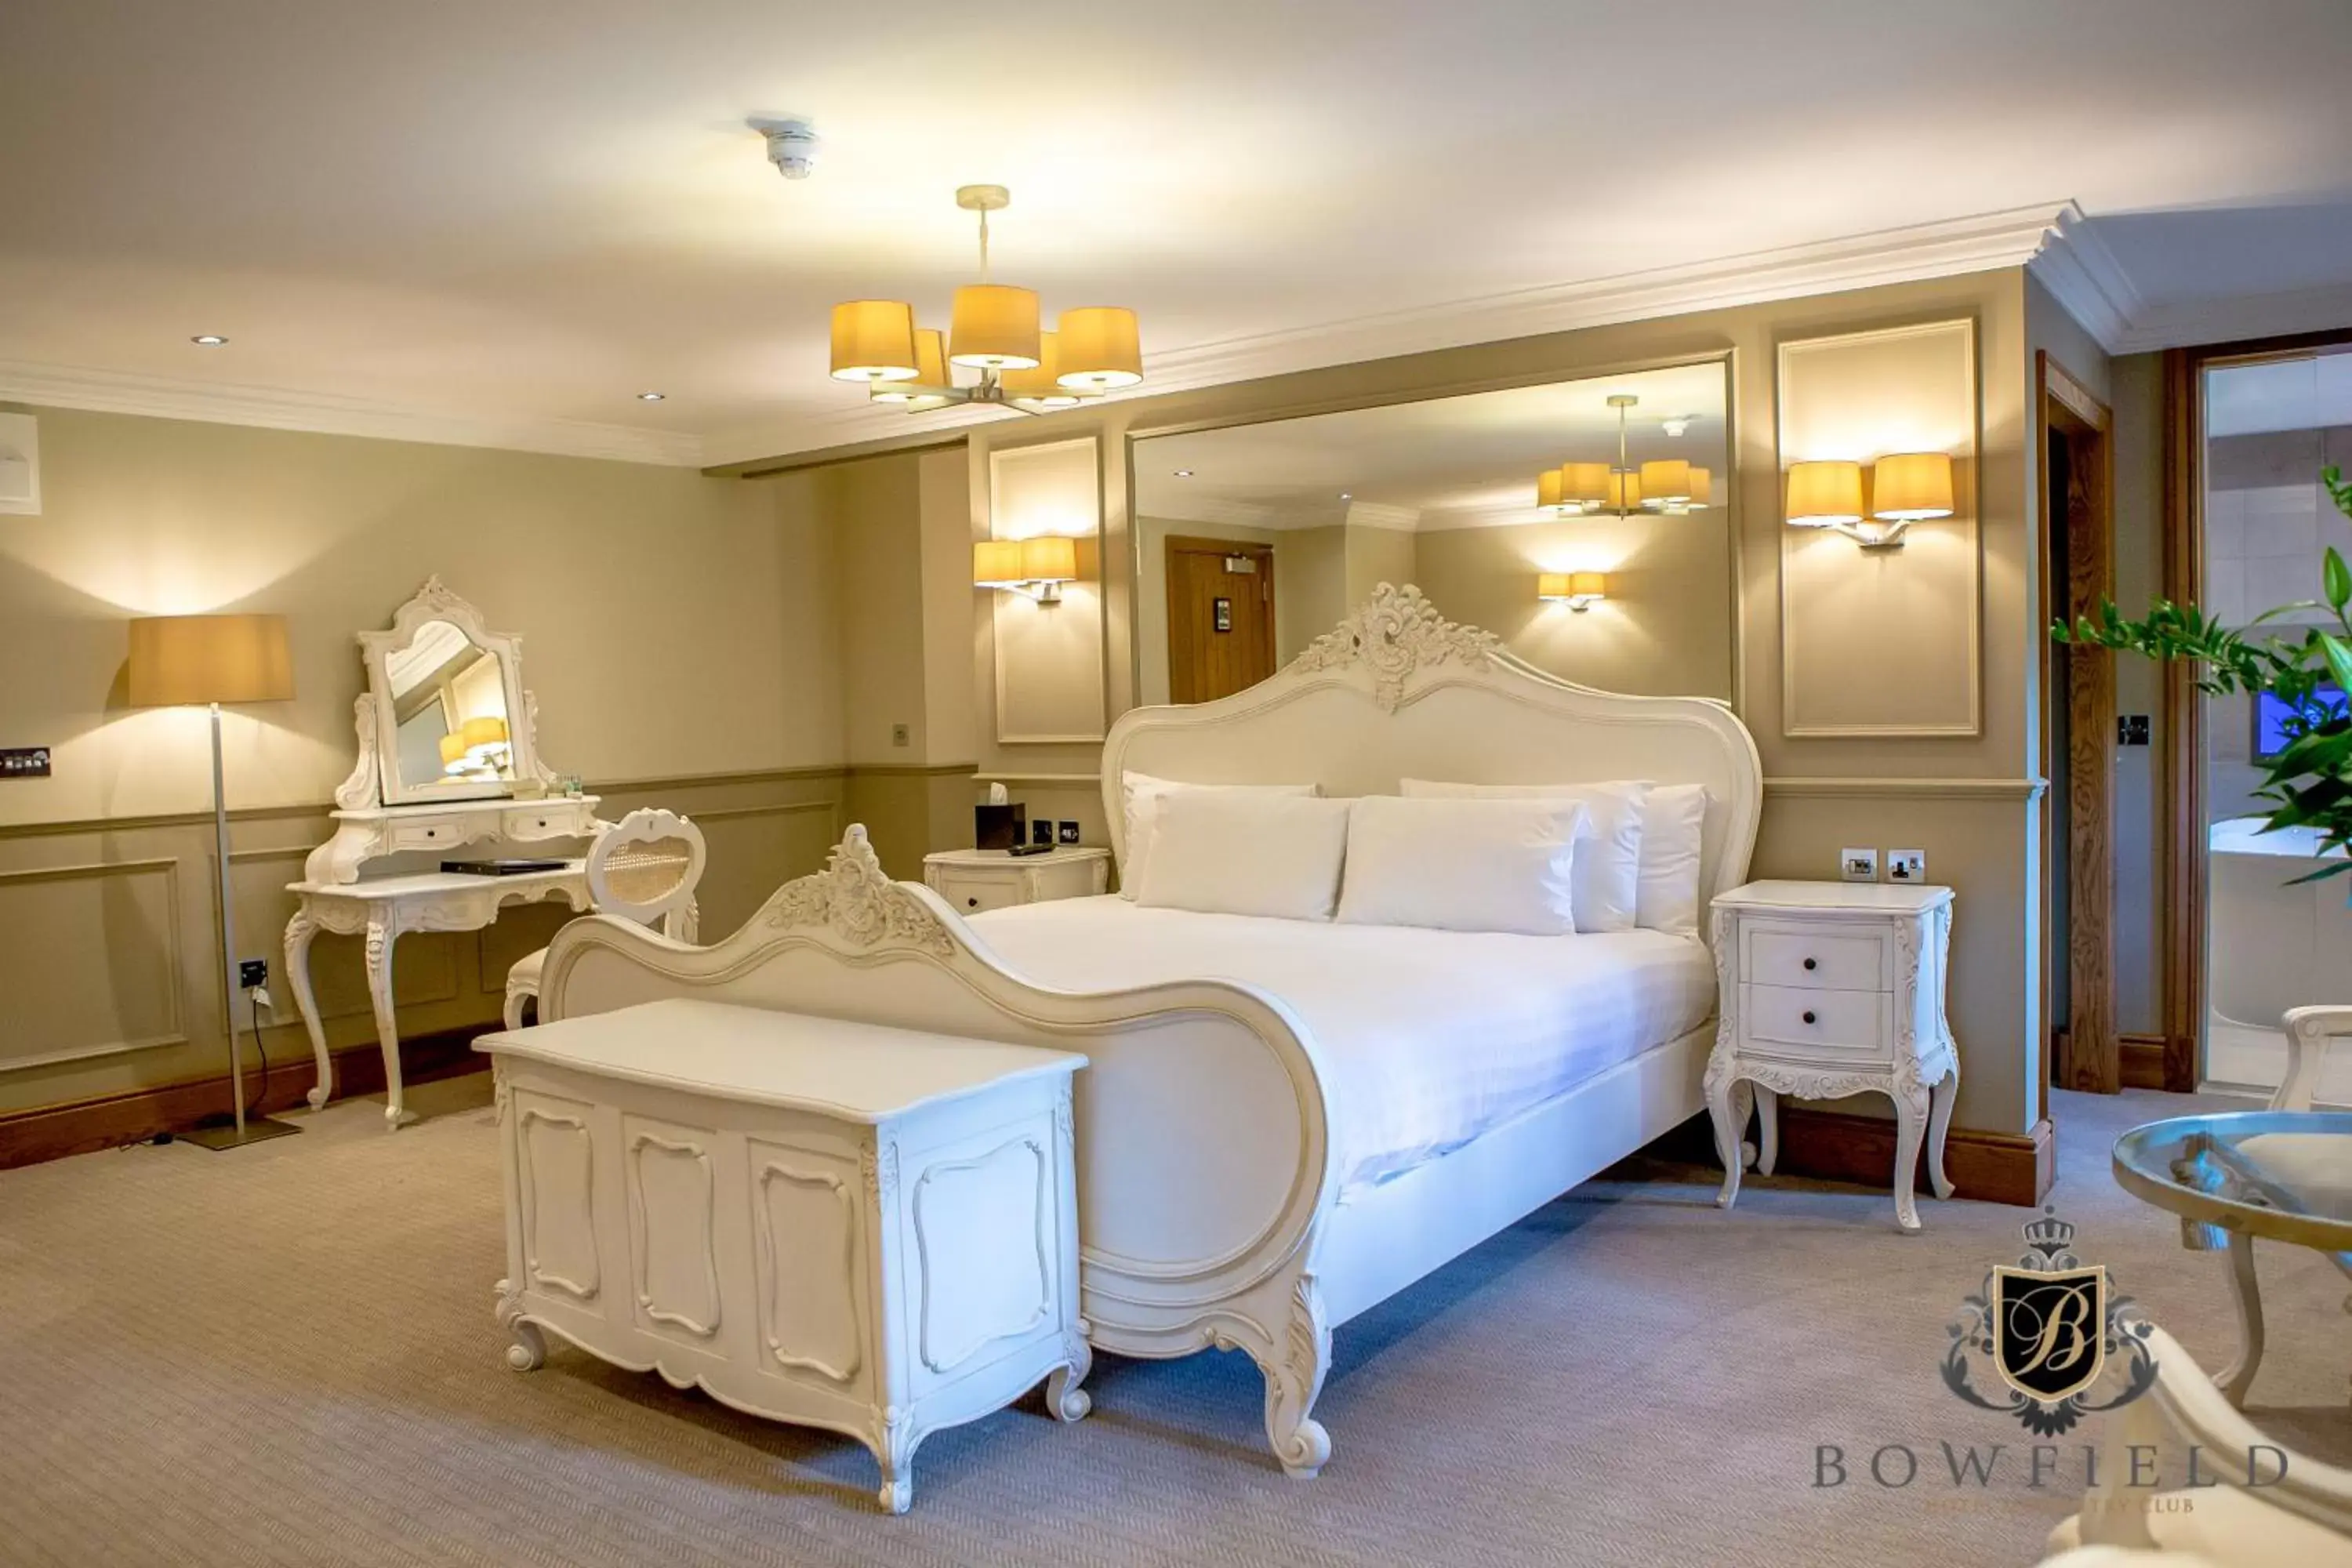 Bed, Room Photo in Bowfield Hotel and Spa